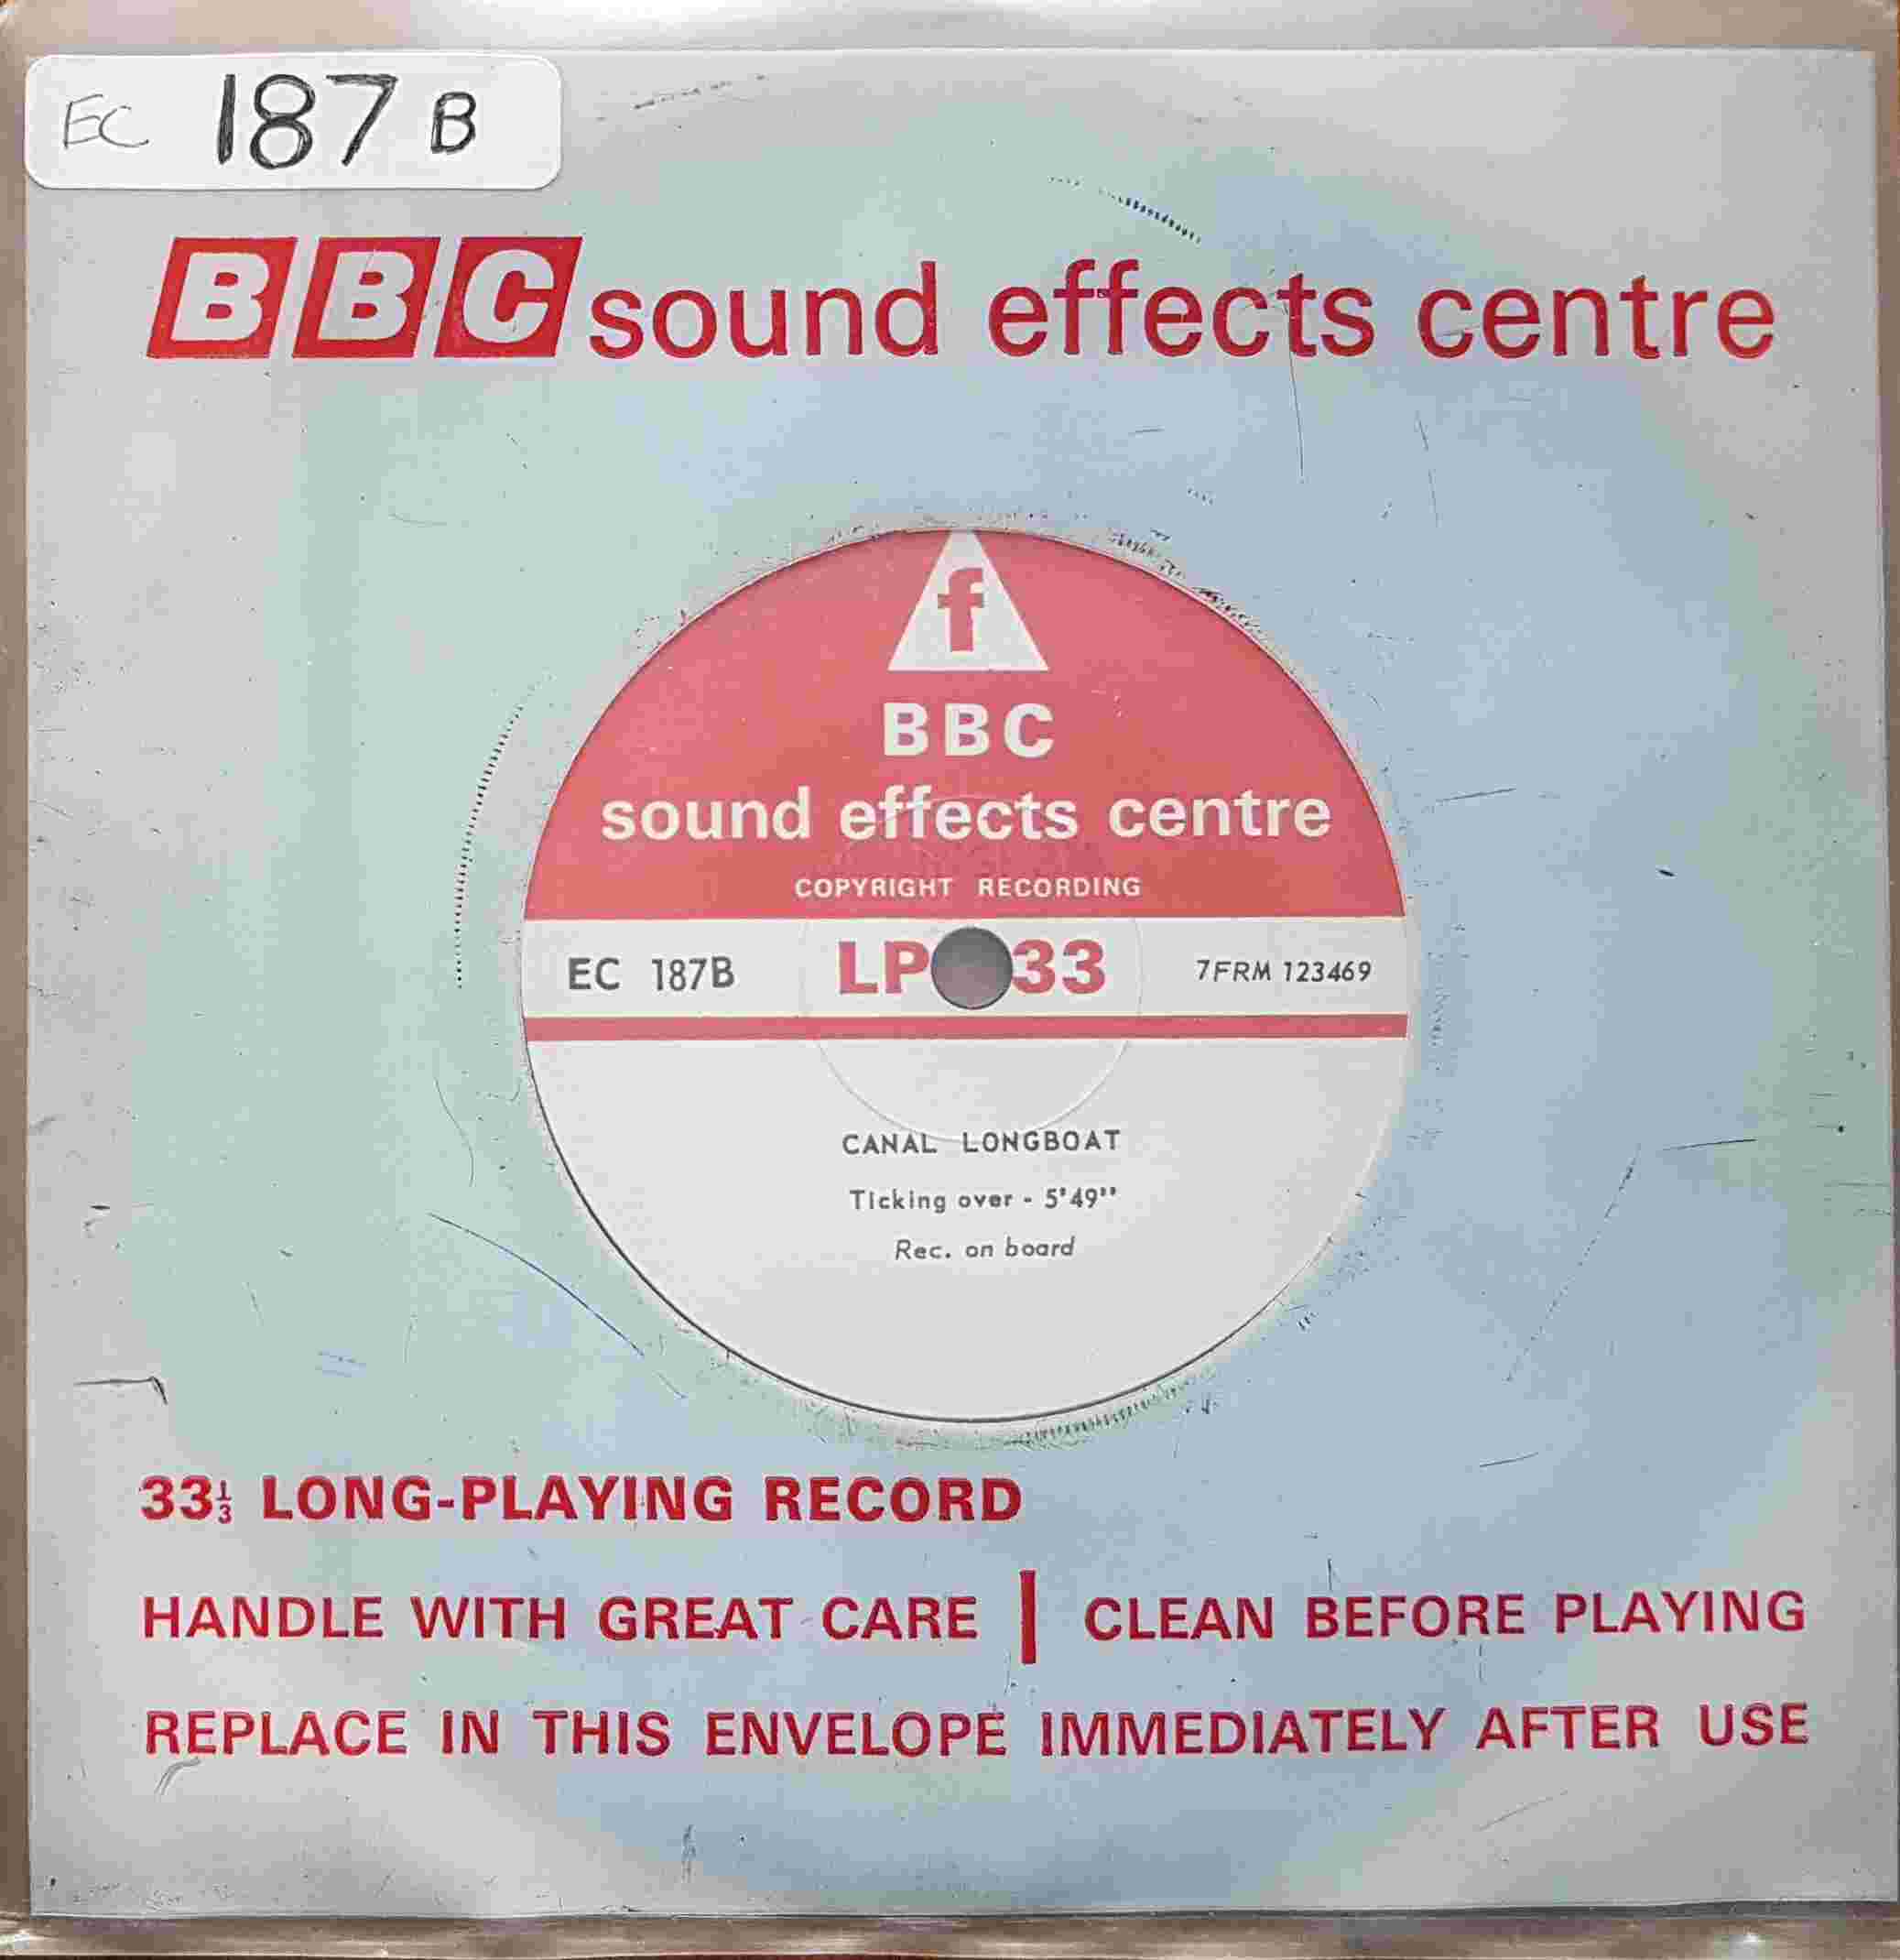 Picture of EC 187B Canal longboat (Rec. on board) by artist Not registered from the BBC singles - Records and Tapes library